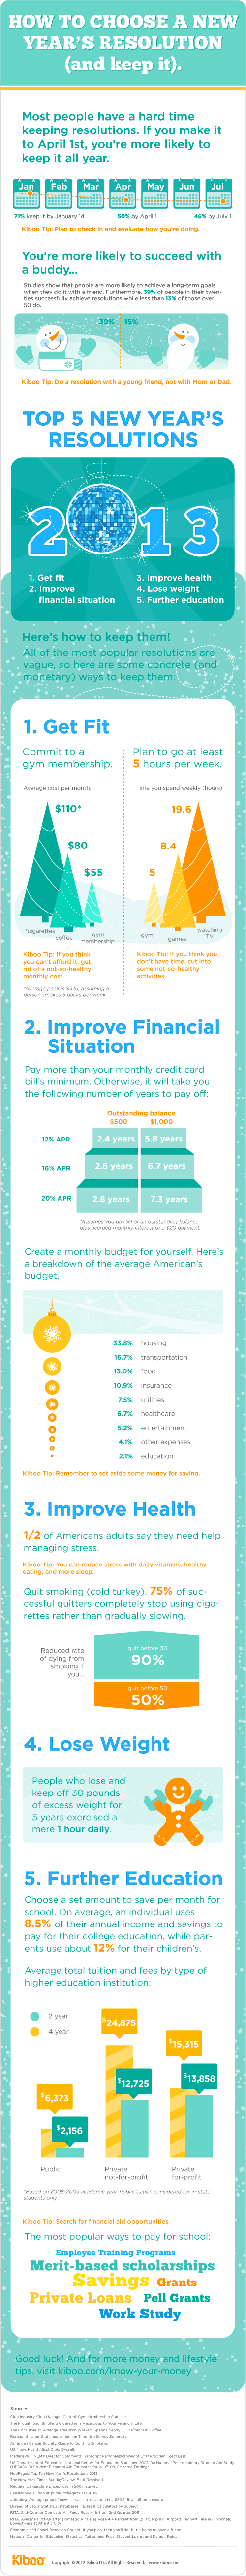 How To Choose A New Year's Resolution (and keep it) [INFOGRAPHIC]